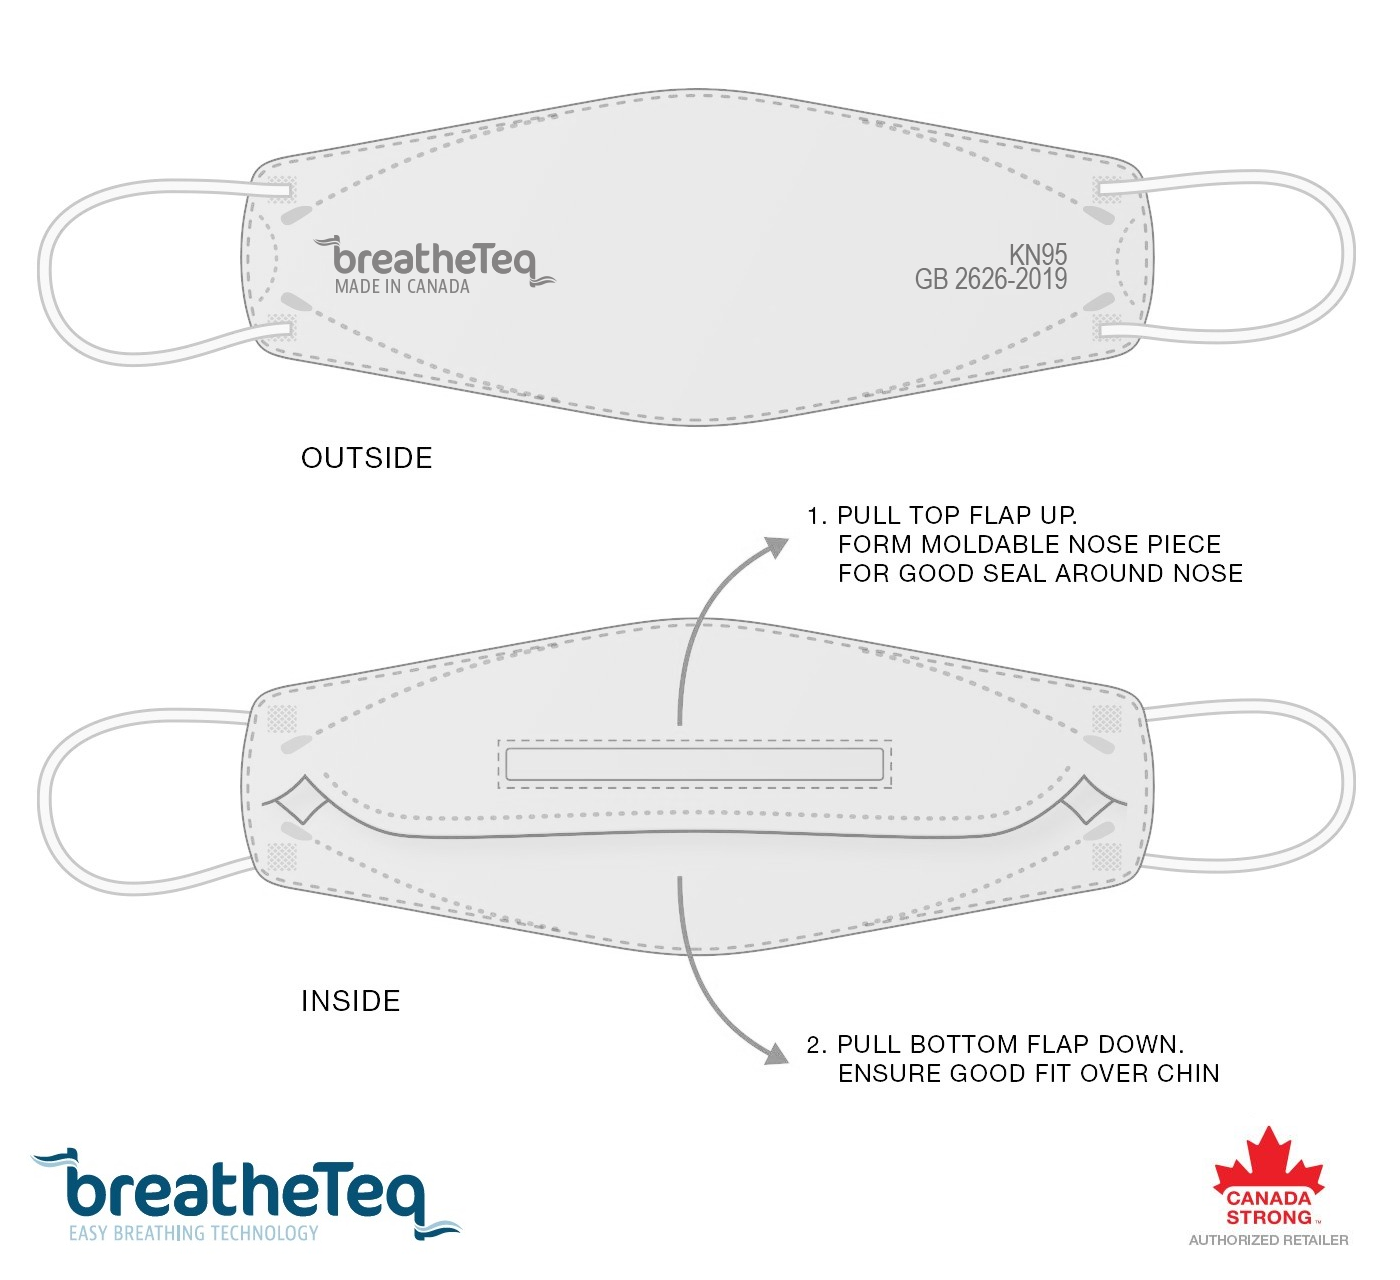 How to use BreatheTeq KN95 mask from Canada